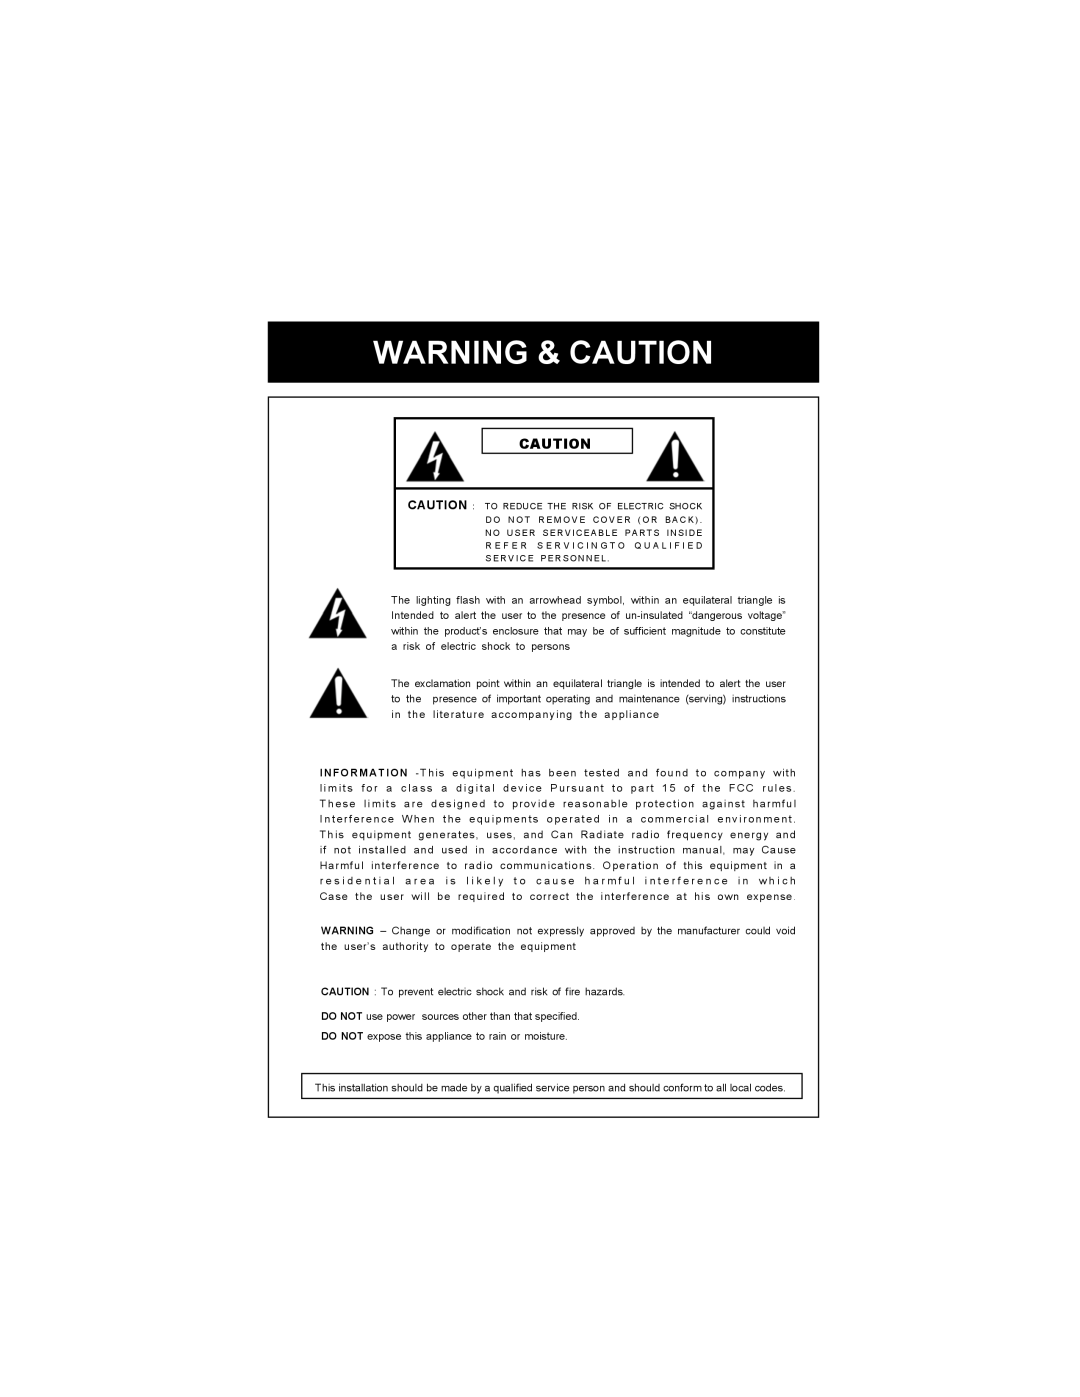 Speco Technologies WDR-R3 manual Warning & Caution, the appliance 